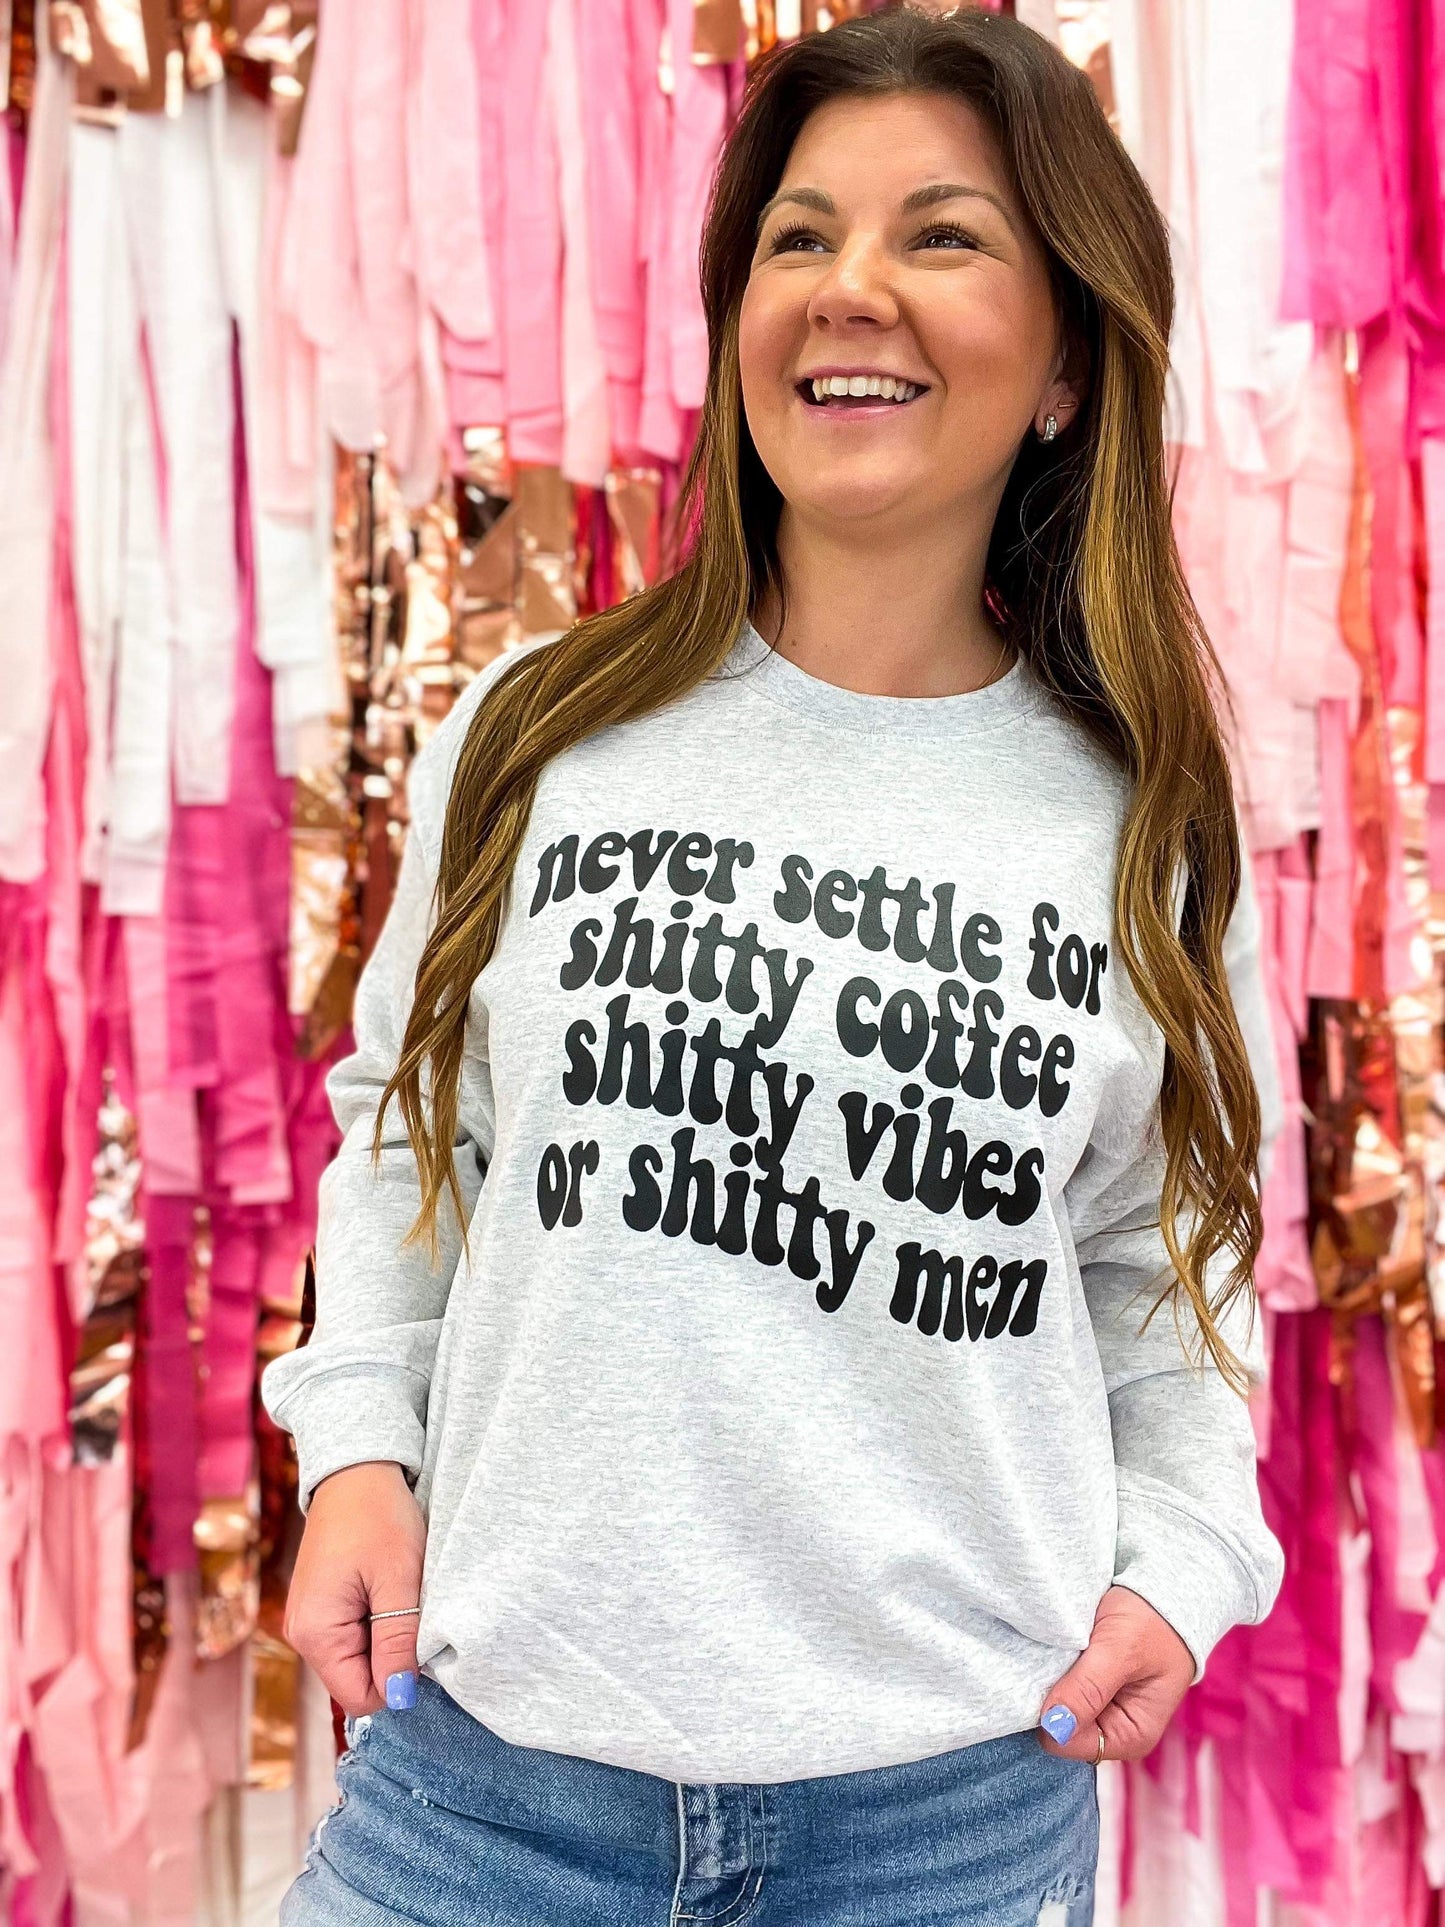 Never Settle For Sh*tty Coffe, Vibes or Men Sweatshirt